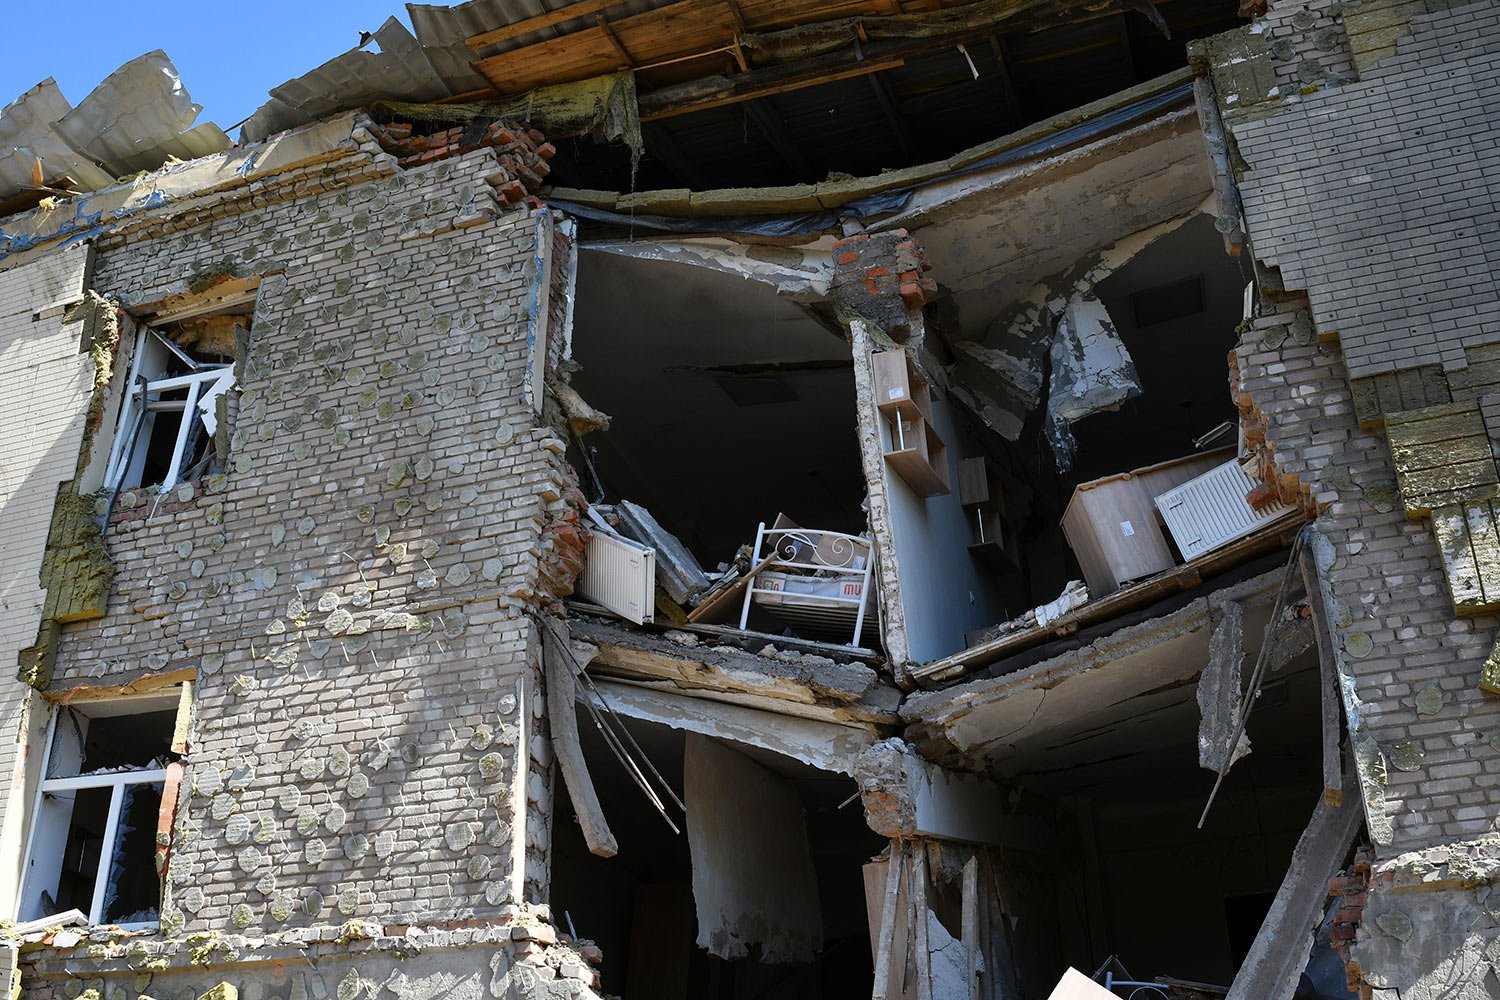  A baby bed is seen inside an apartment building damaged by Russian shelling in Bakhmut, Donetsk region, Ukraine, Thursday, May 12, 2022. (AP Photo/Andriy Andriyenko) 